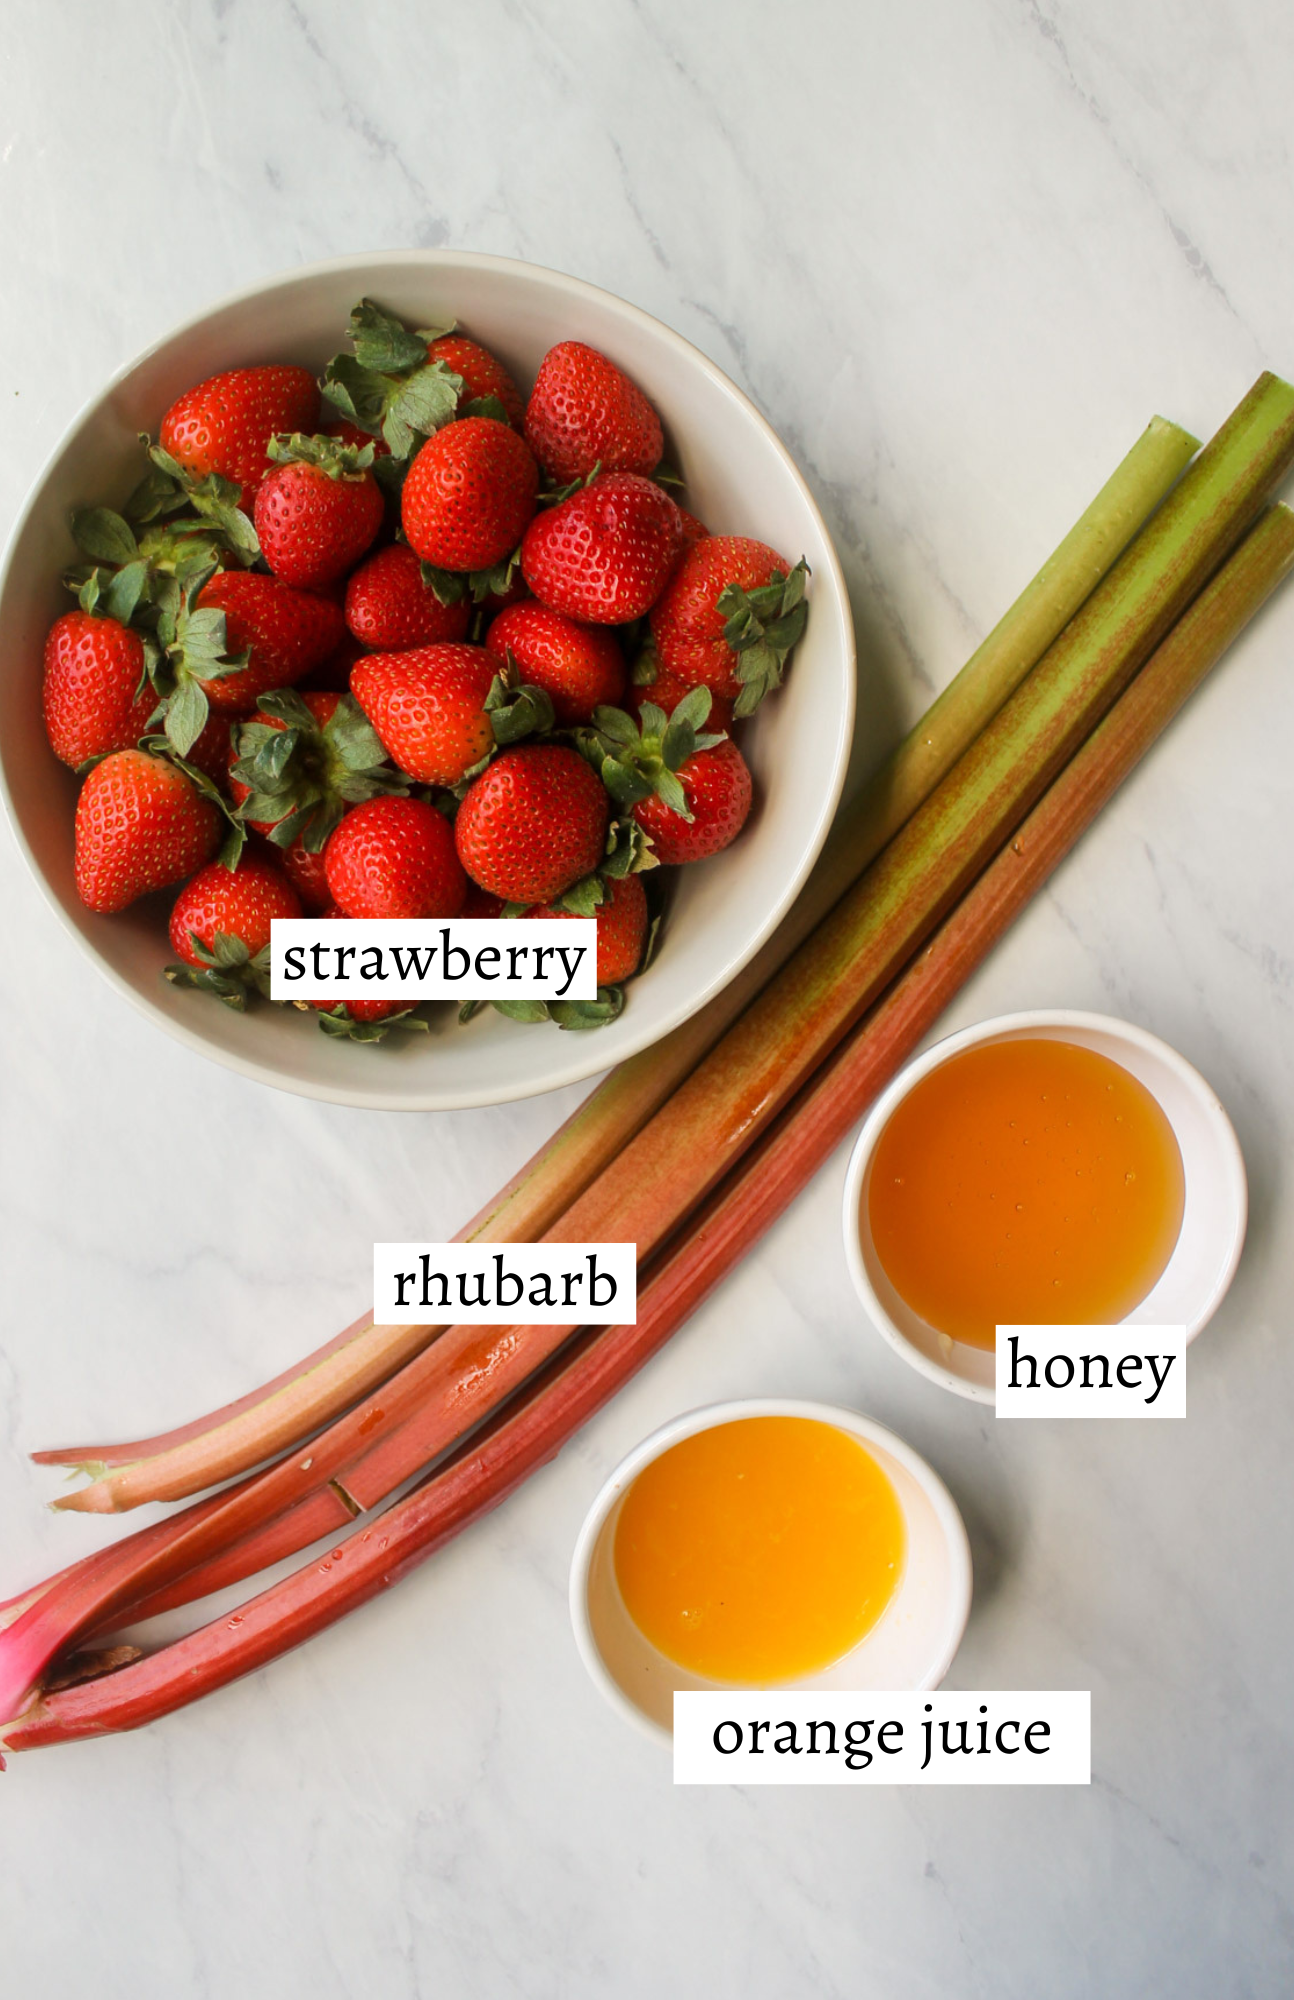 Labeled ingredients for Strawberry Rhubarb Sauce.